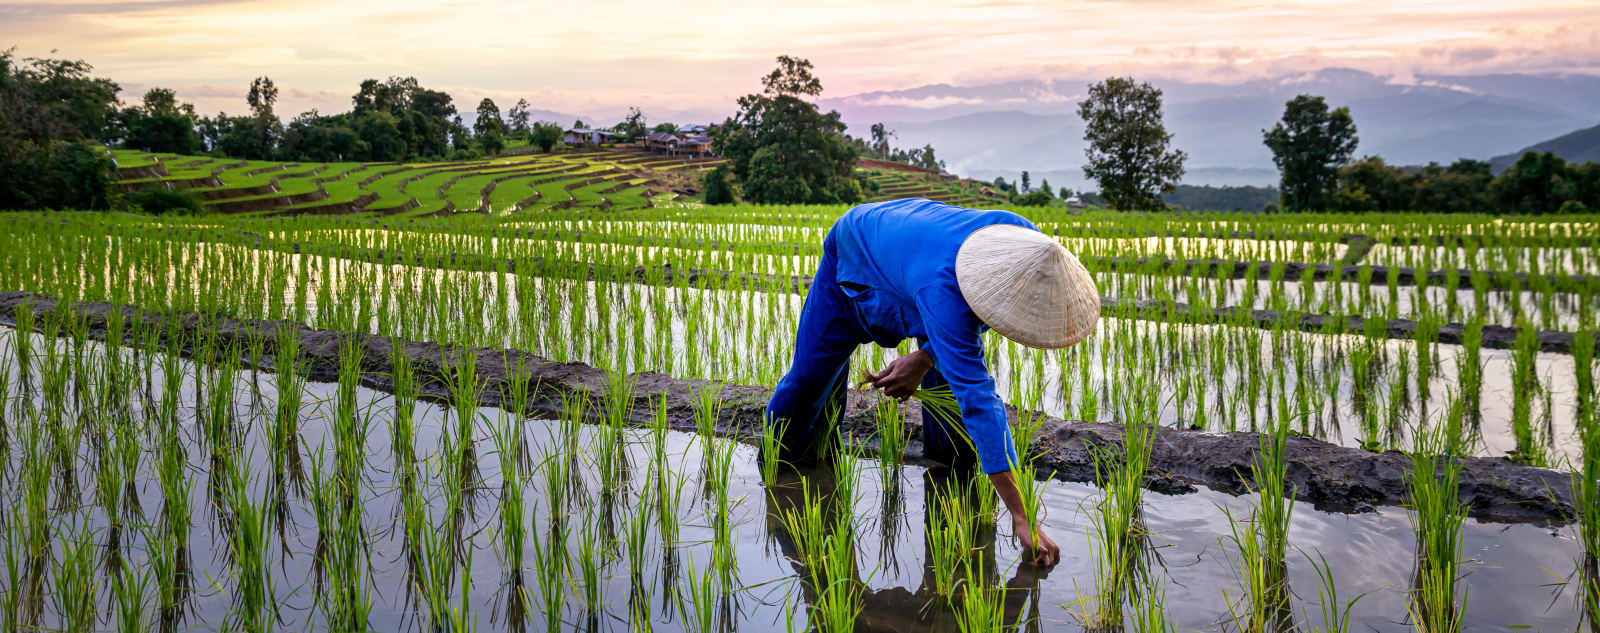 A man in a rice hat leans over to pick rice at sunset.